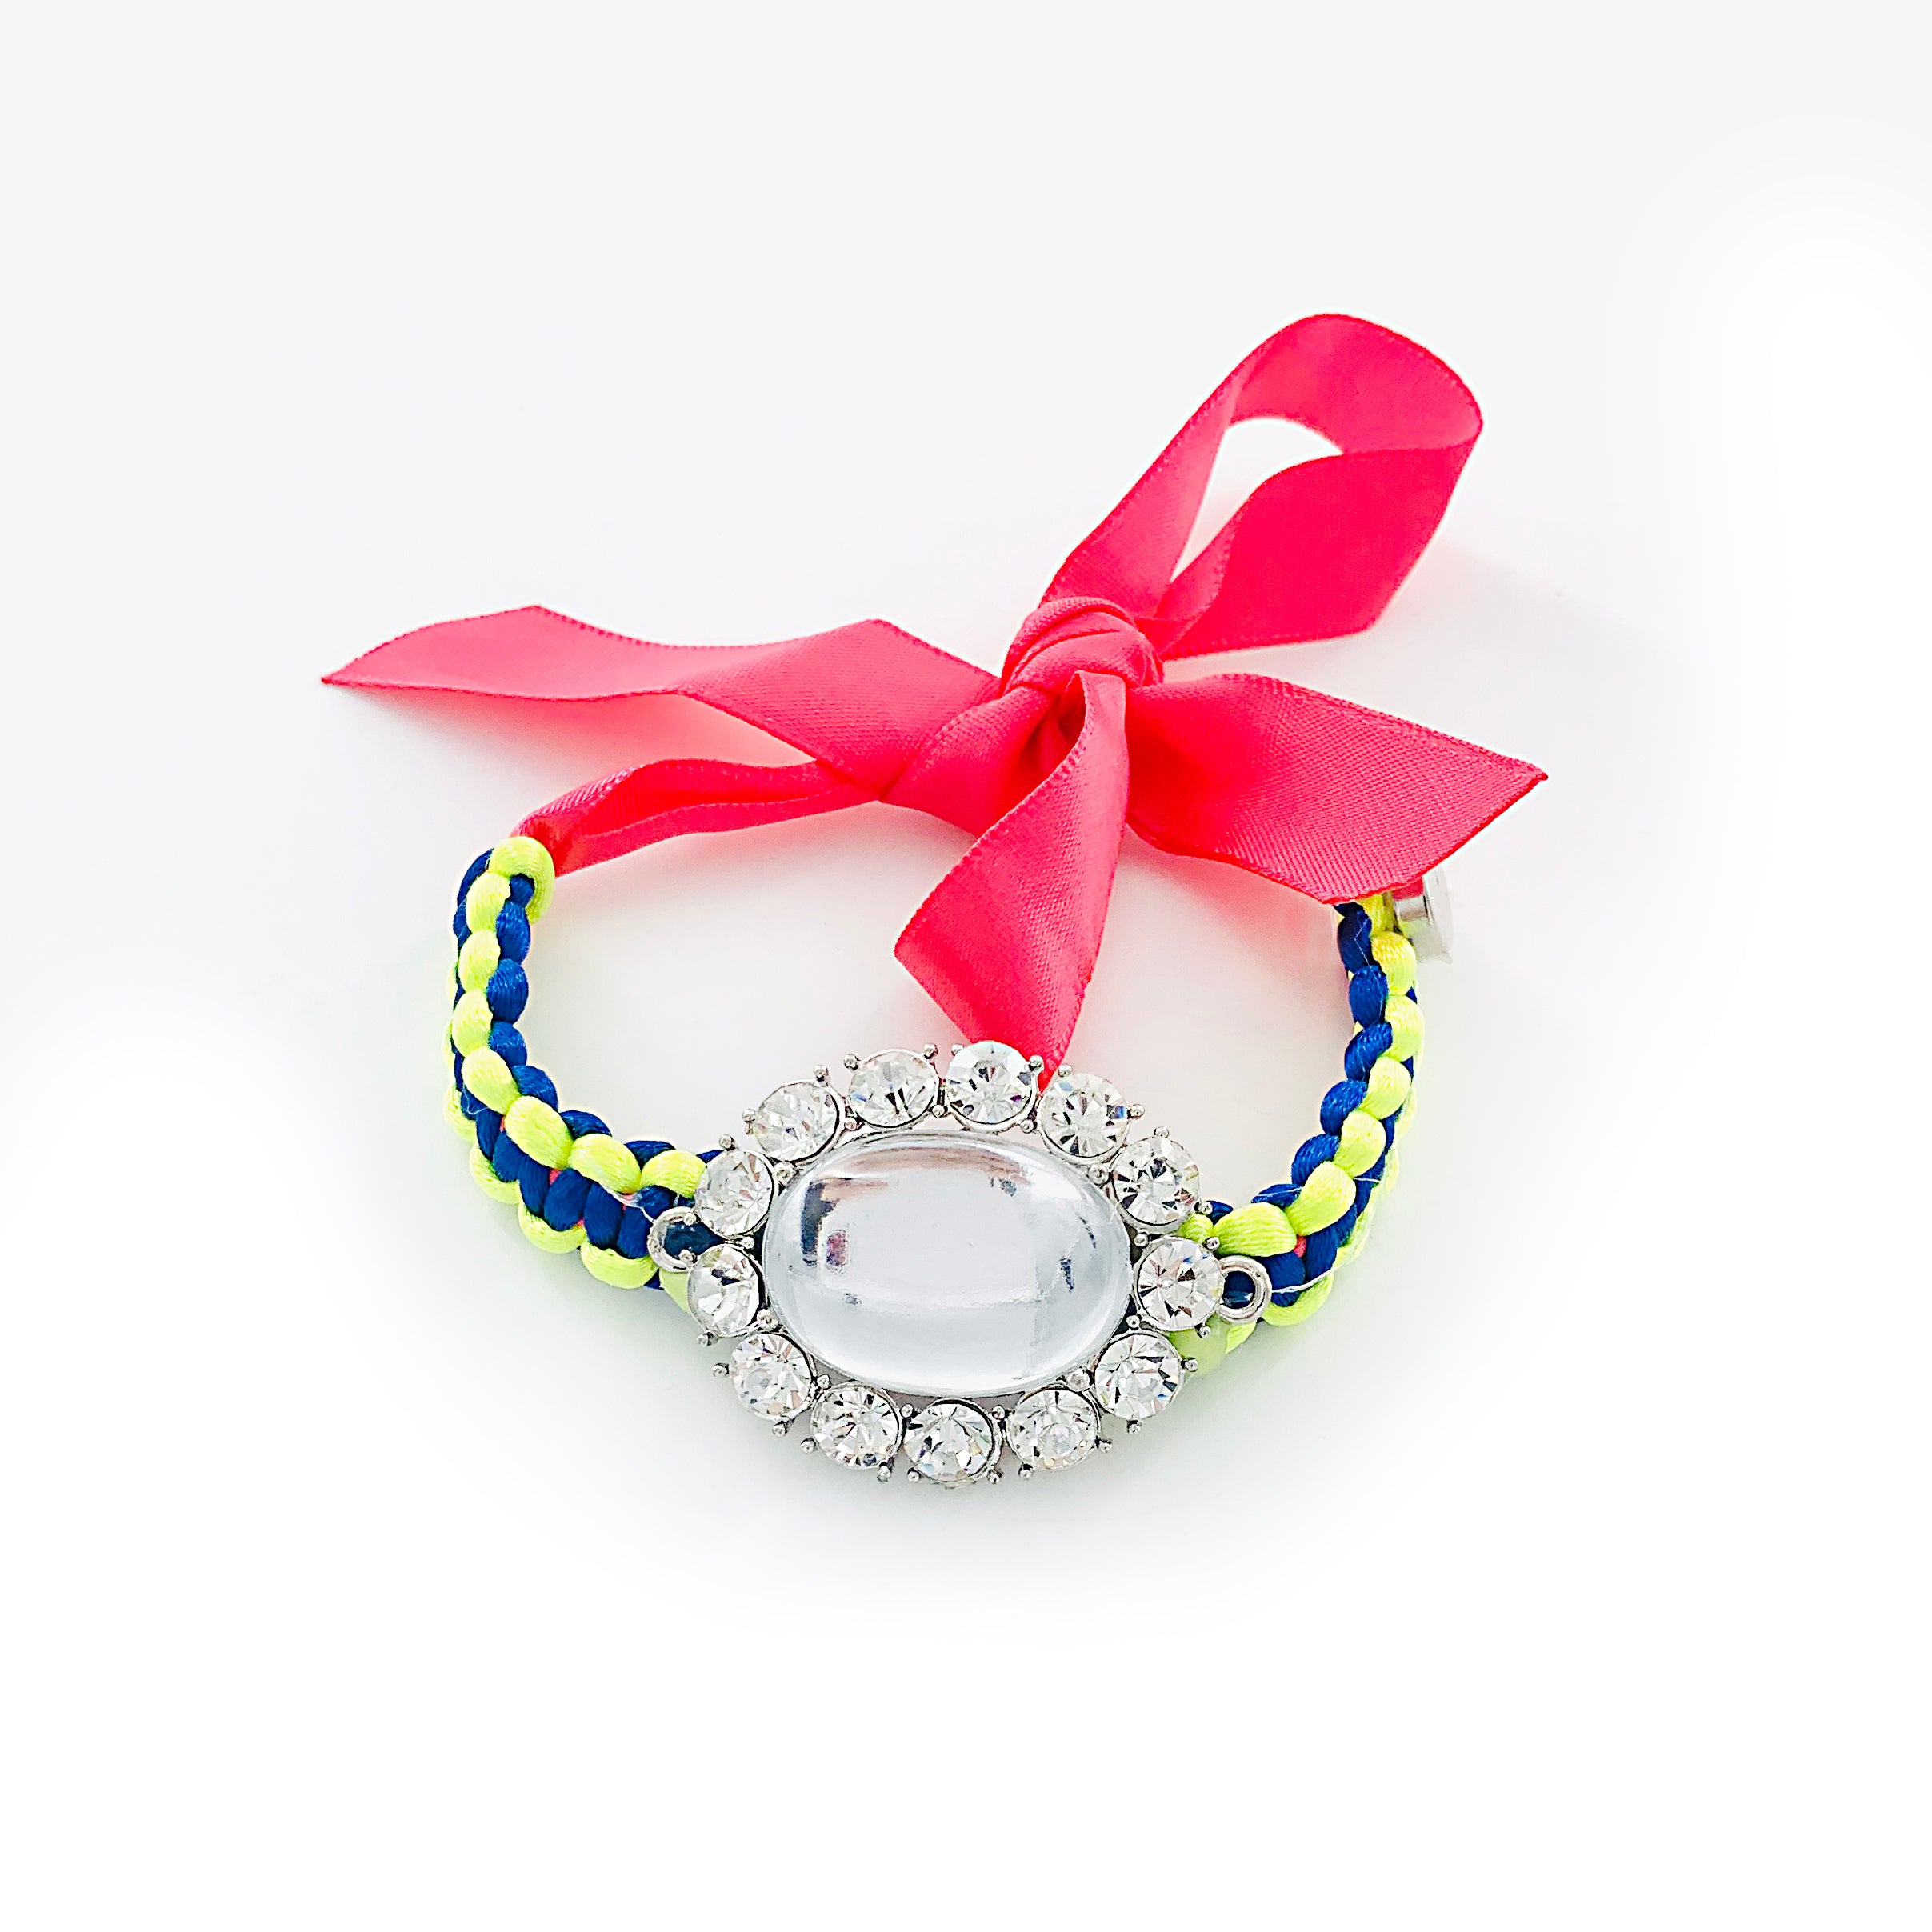 Large diamante stone with Ribbon and Rope band